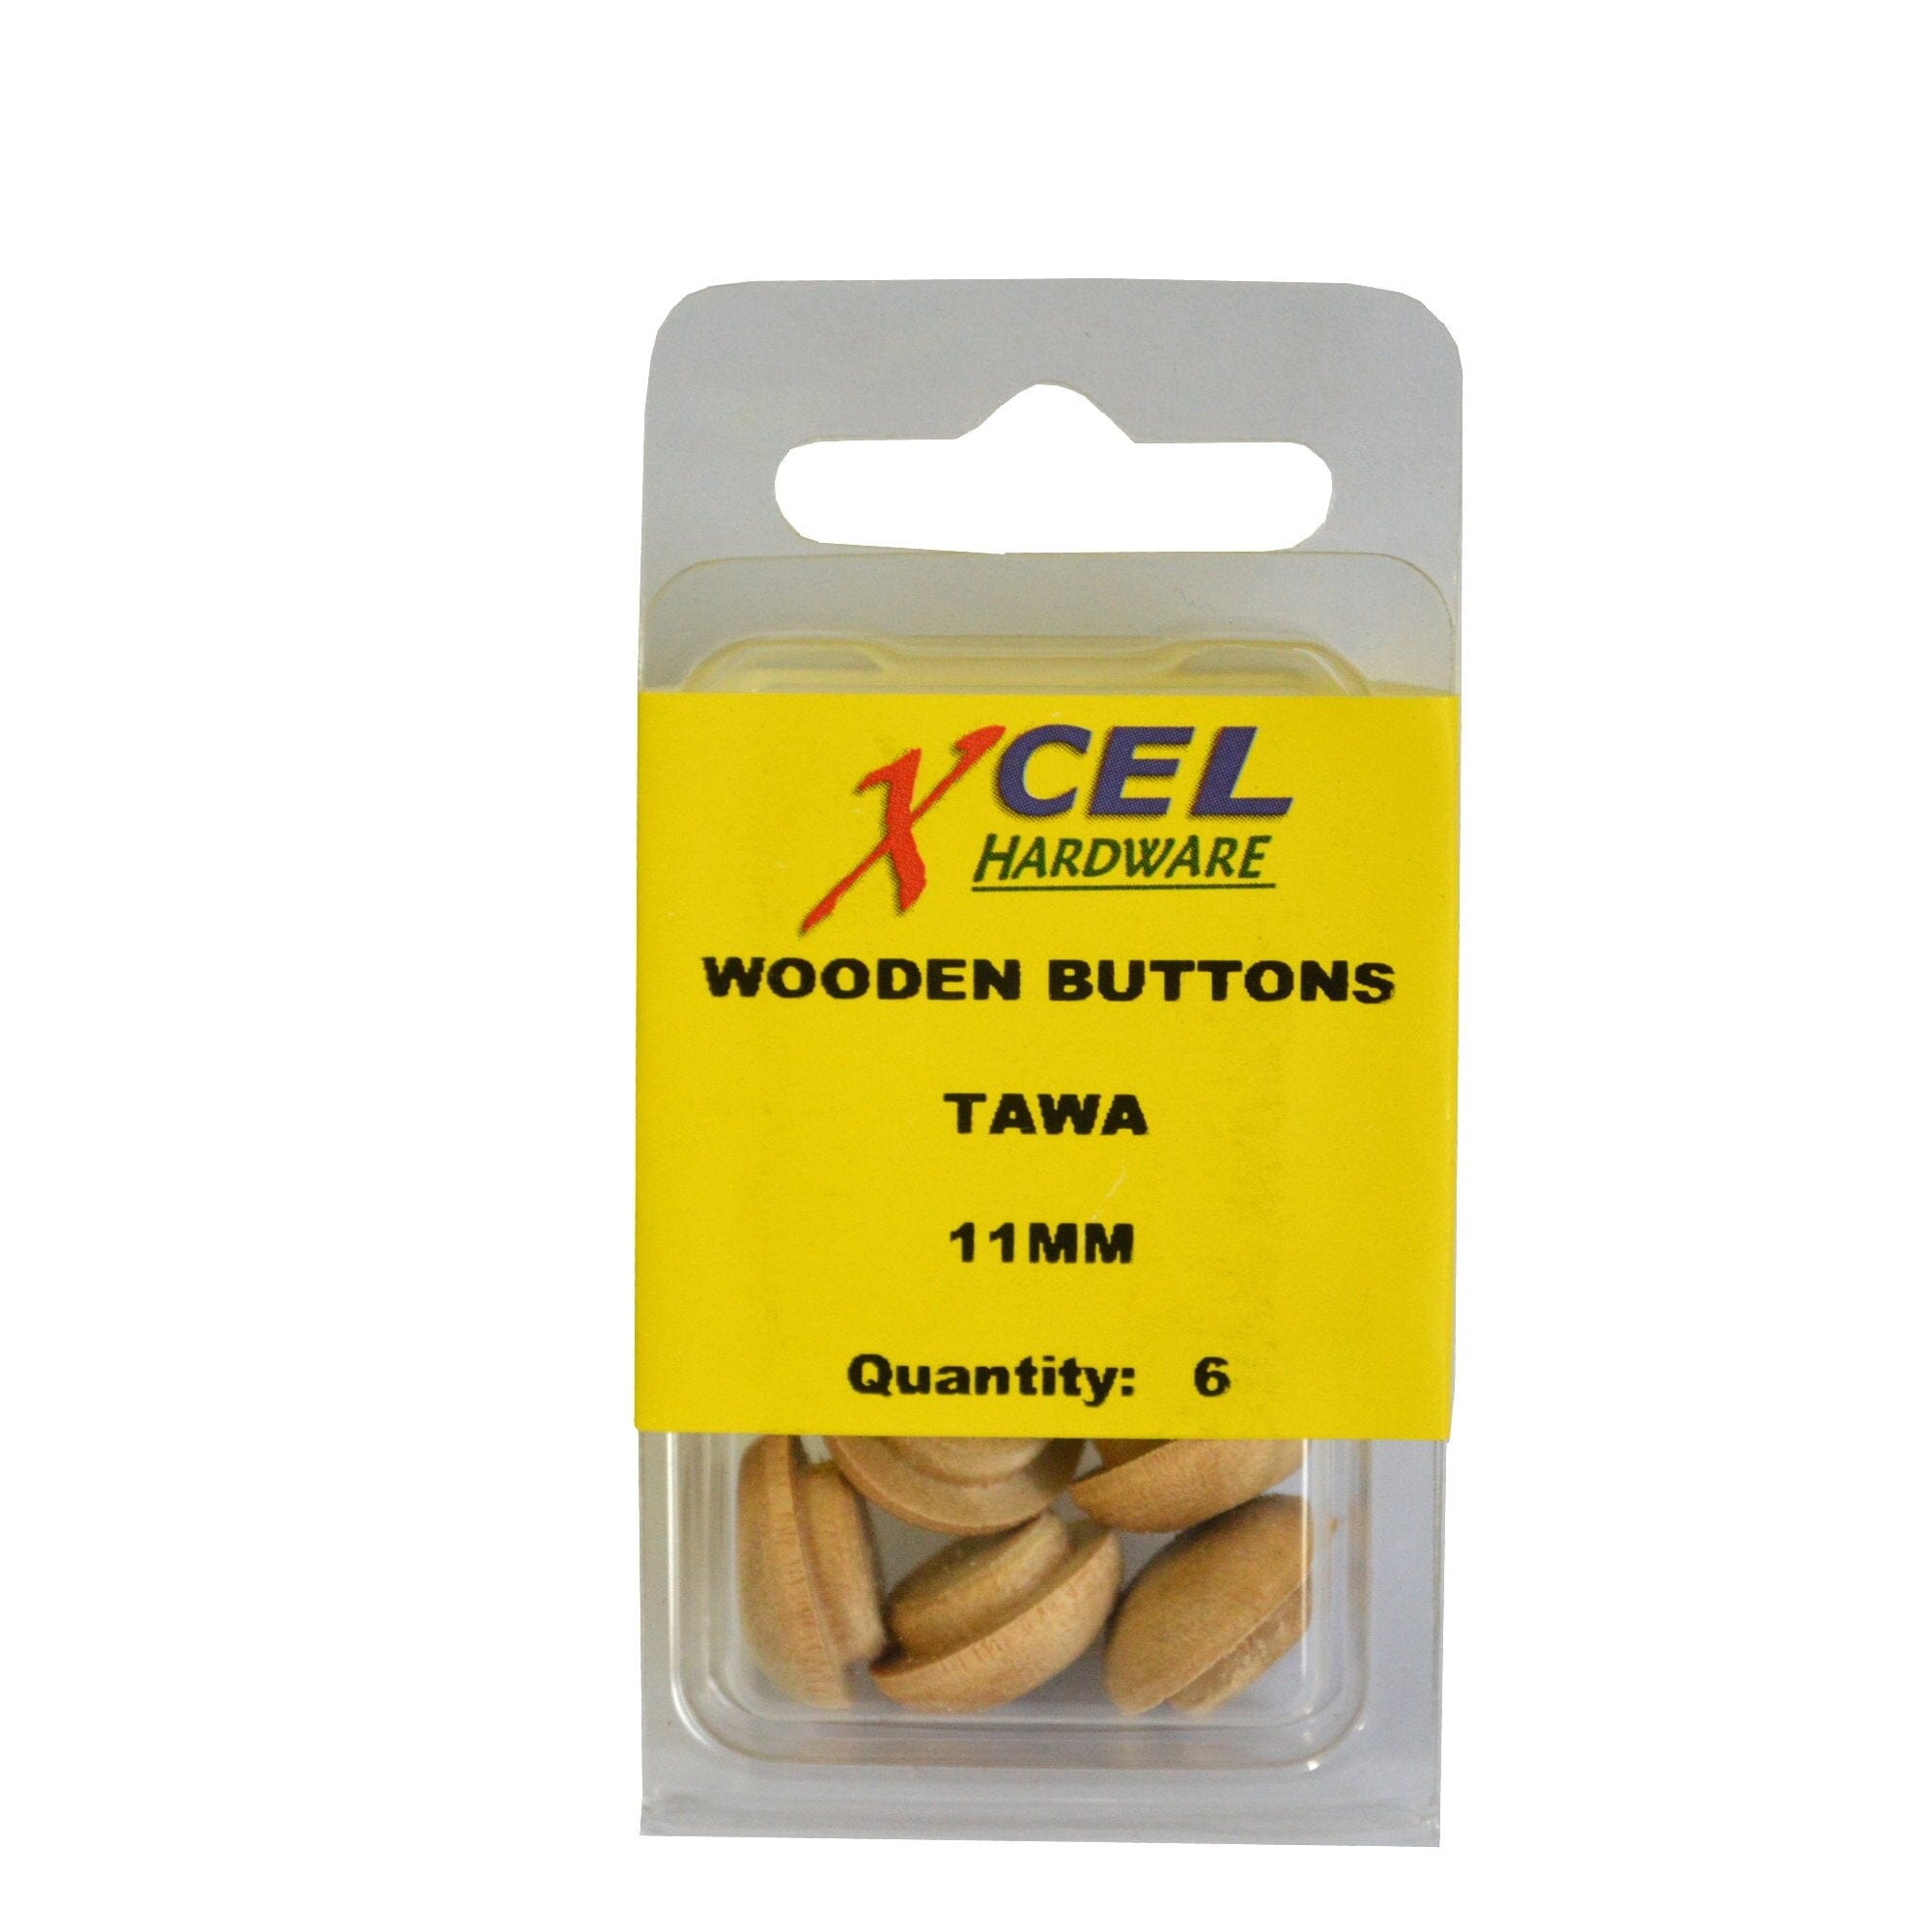 Xcel Wooden Pin Buttons - Tawa 6-pce 11mm